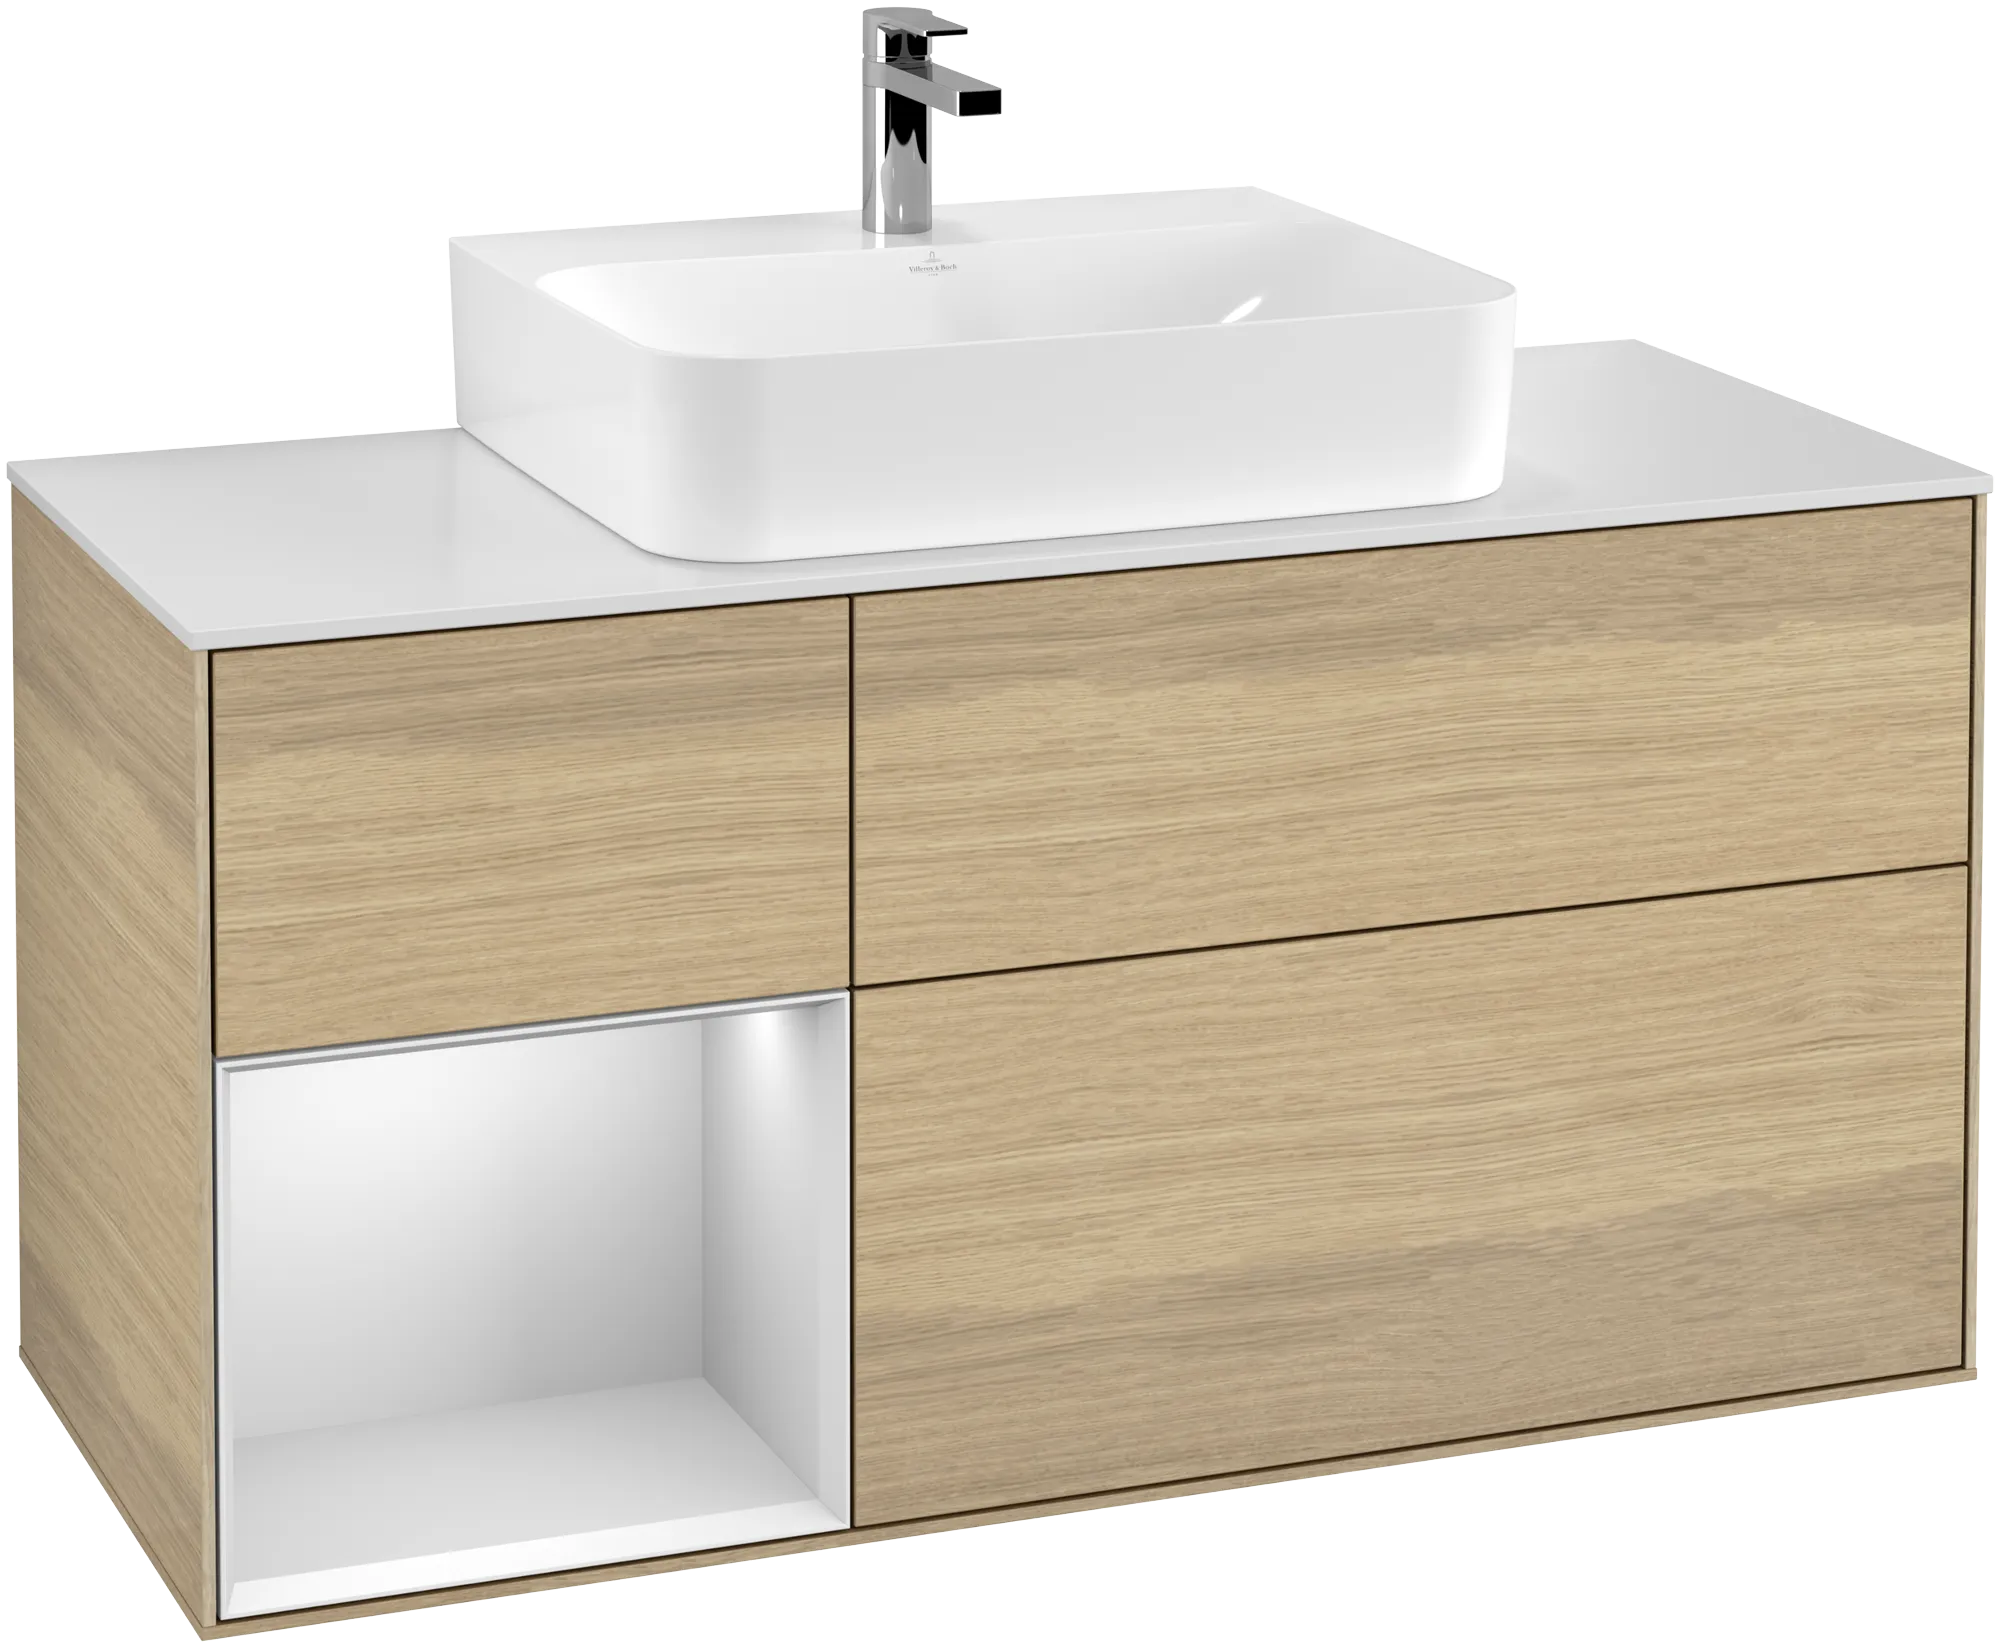 Picture of VILLEROY BOCH Finion Vanity unit, with lighting, 3 pull-out compartments, 1200 x 603 x 501 mm, Oak Veneer / White Matt Lacquer / Glass White Matt #G161MTPC